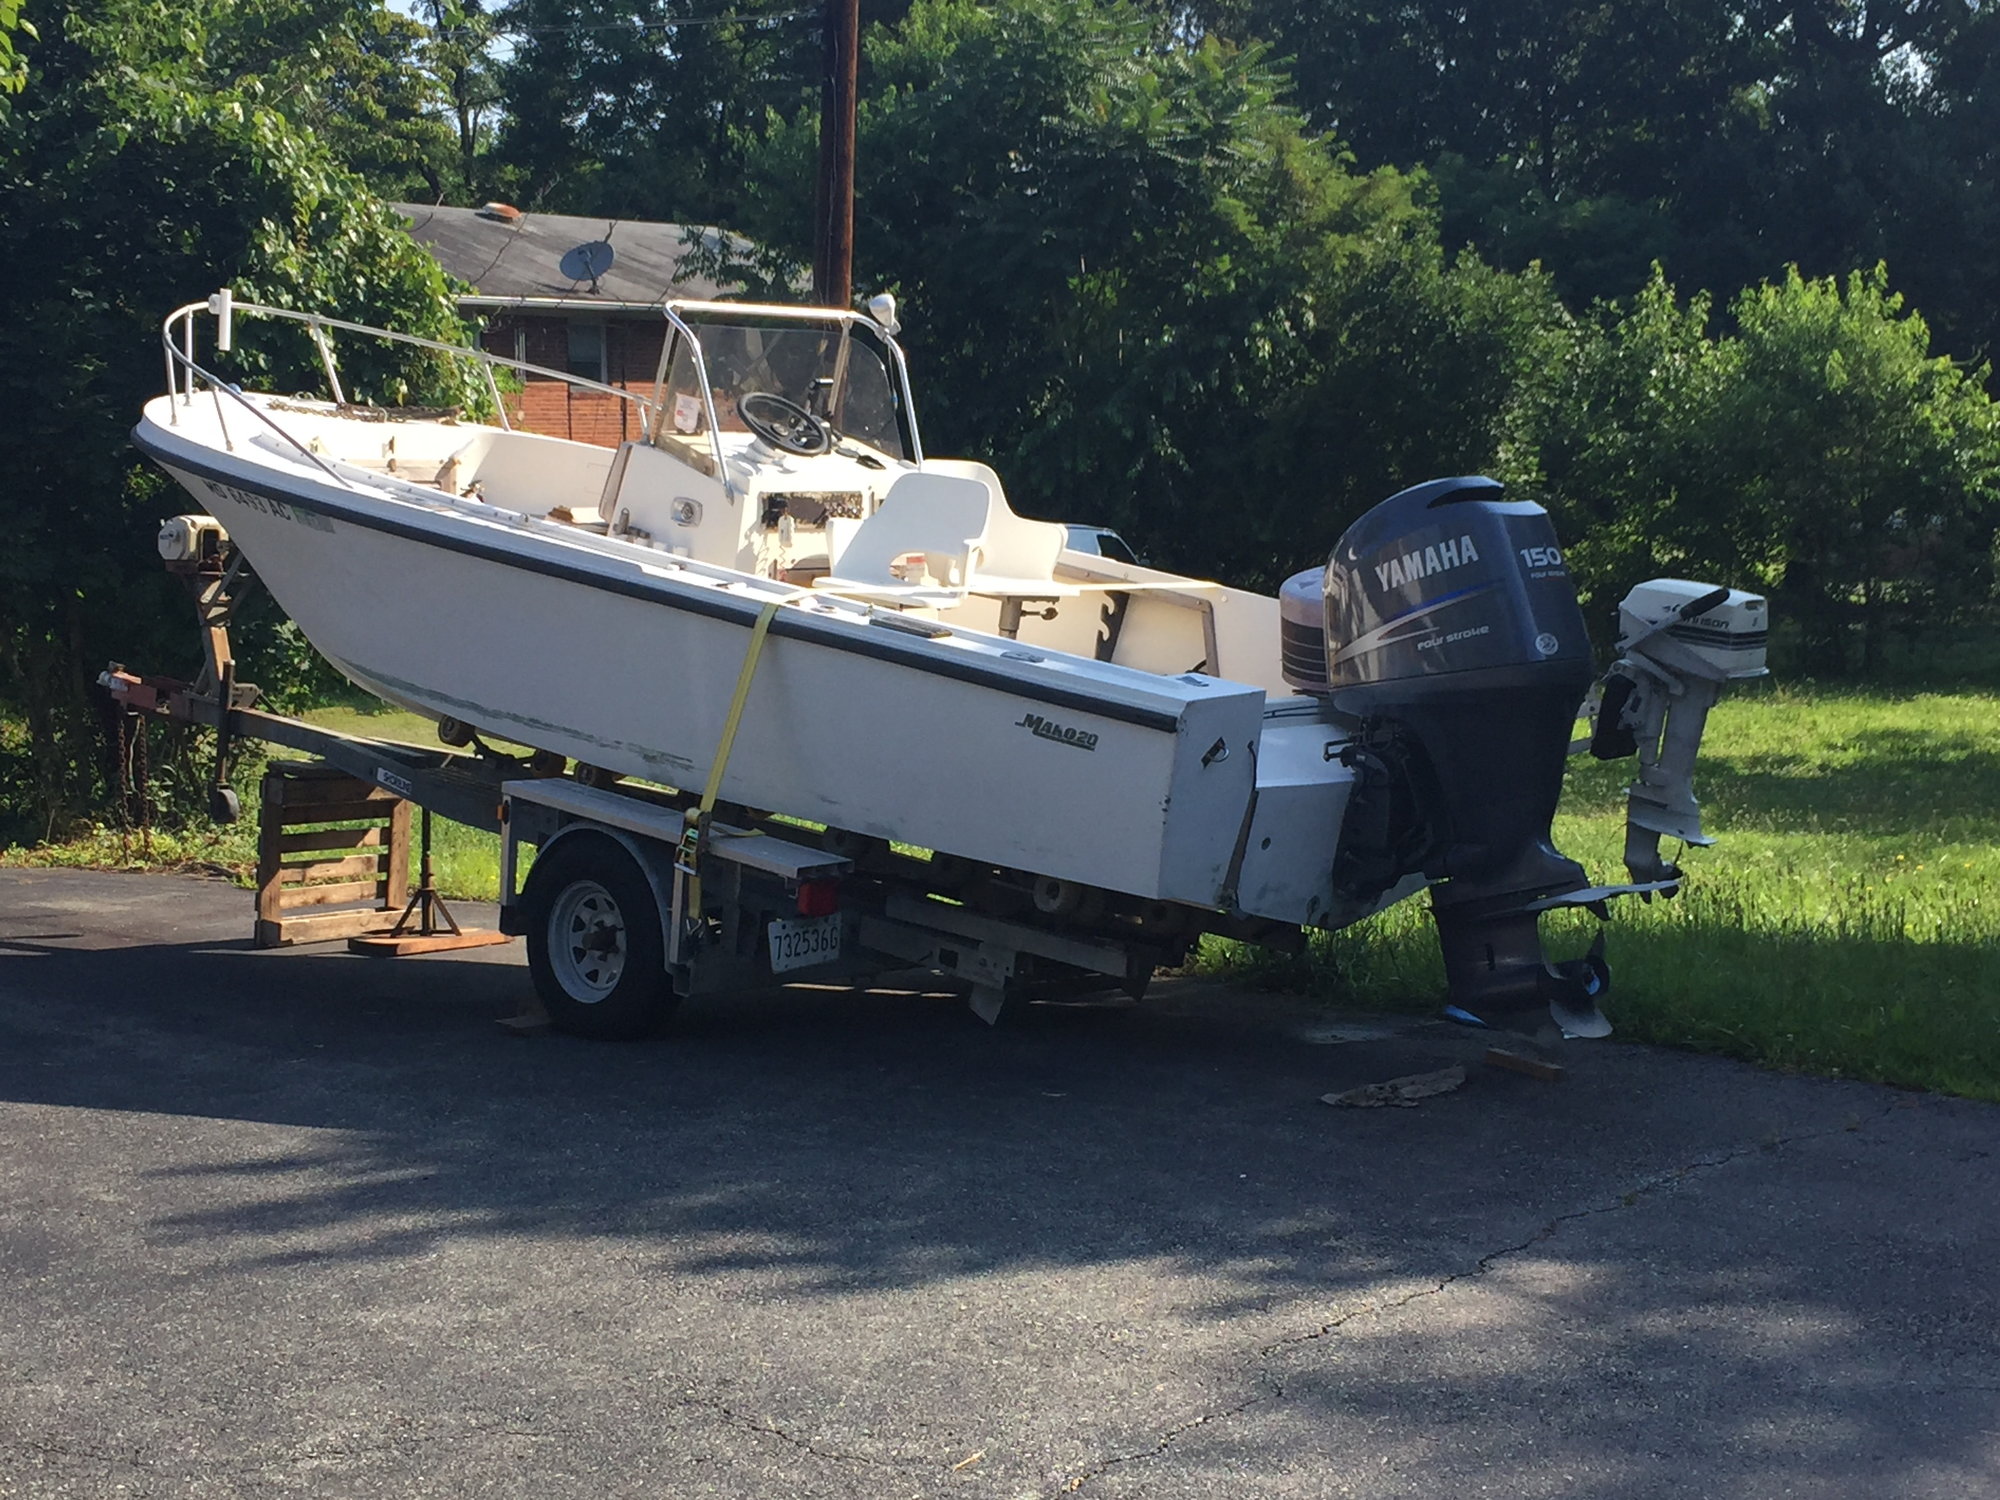 Trailer Advice For 20' Mako CC W/ Yam 150 4 Stroke - The Hull Truth -  Boating and Fishing Forum